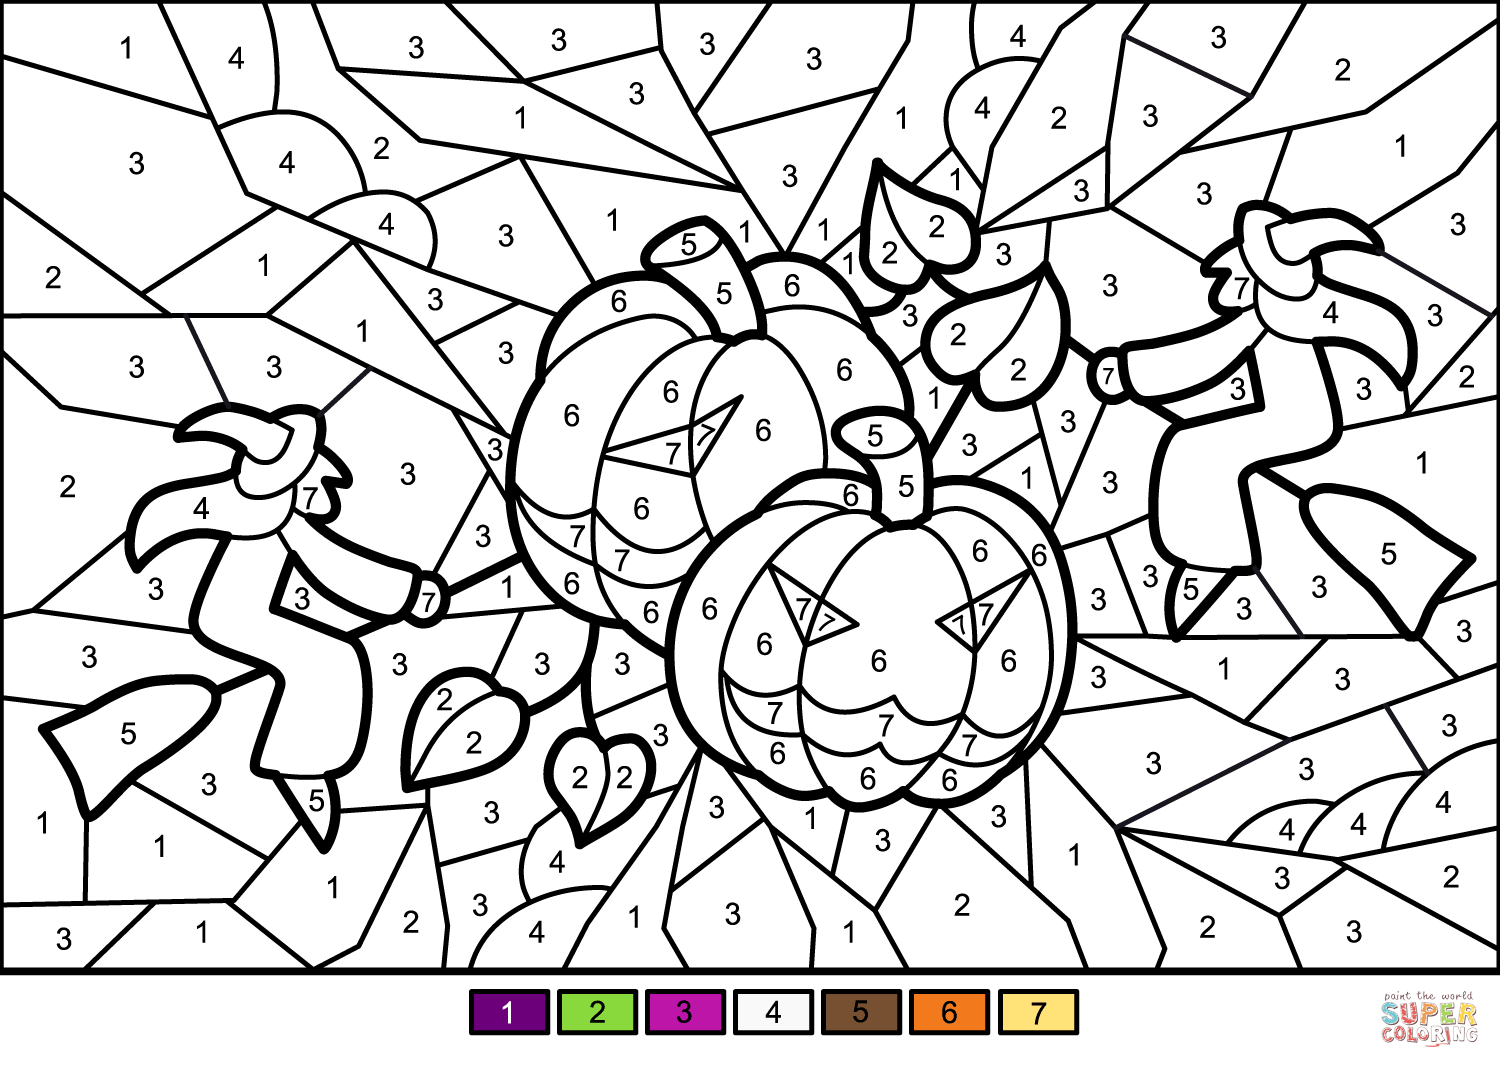 Halloween Pumkins And Witches Colornumber | Free